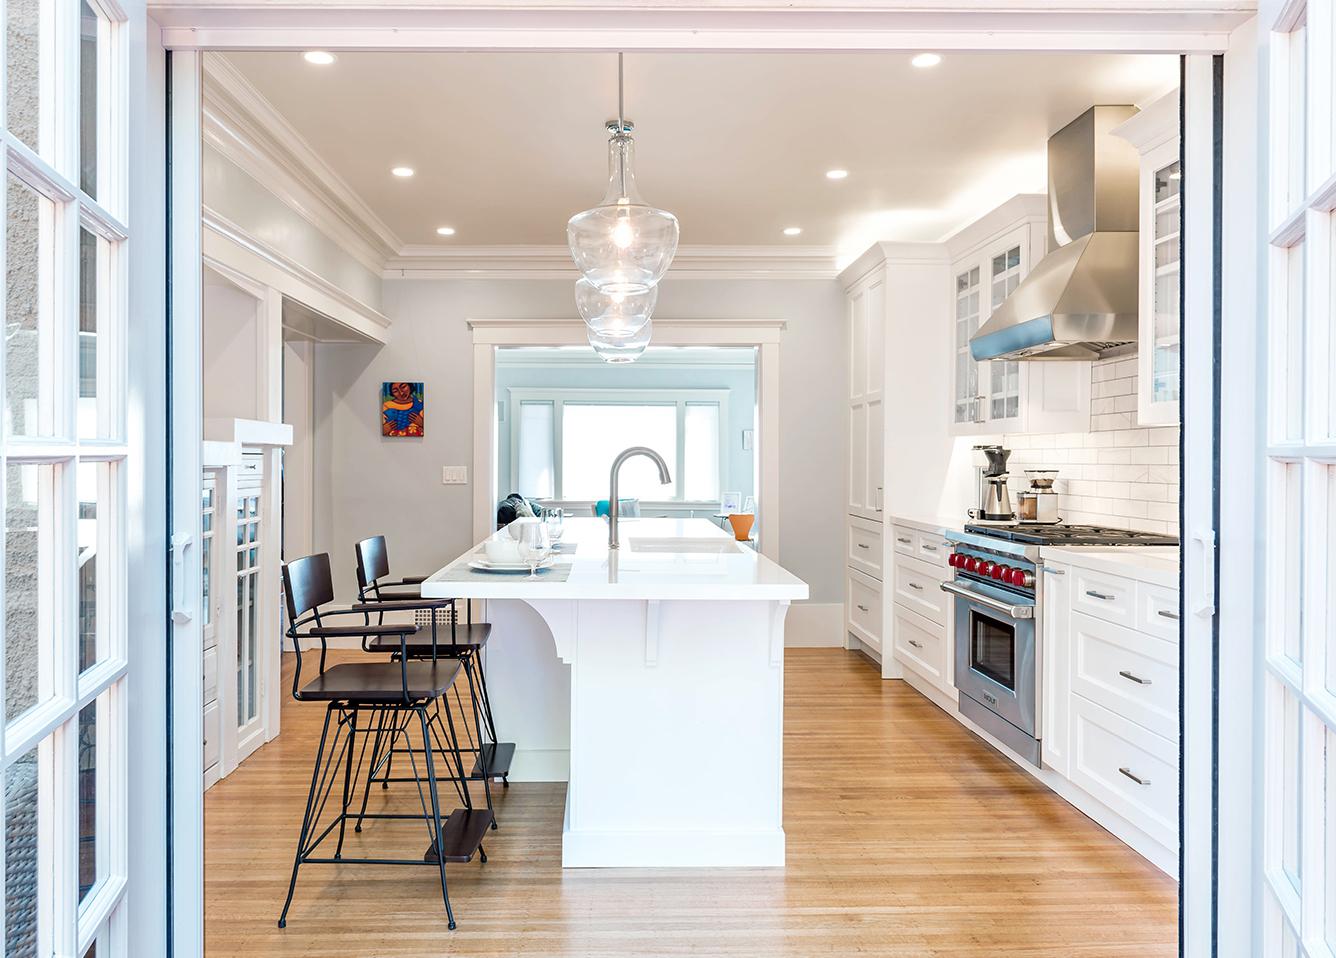 Picture of Roberts Electric Company rewired this REMMIE award-winning kitchen and installed energy-efficient LED lighting and dramatic Kichler pendant lights over the island. - Roberts Electric Company, Inc.